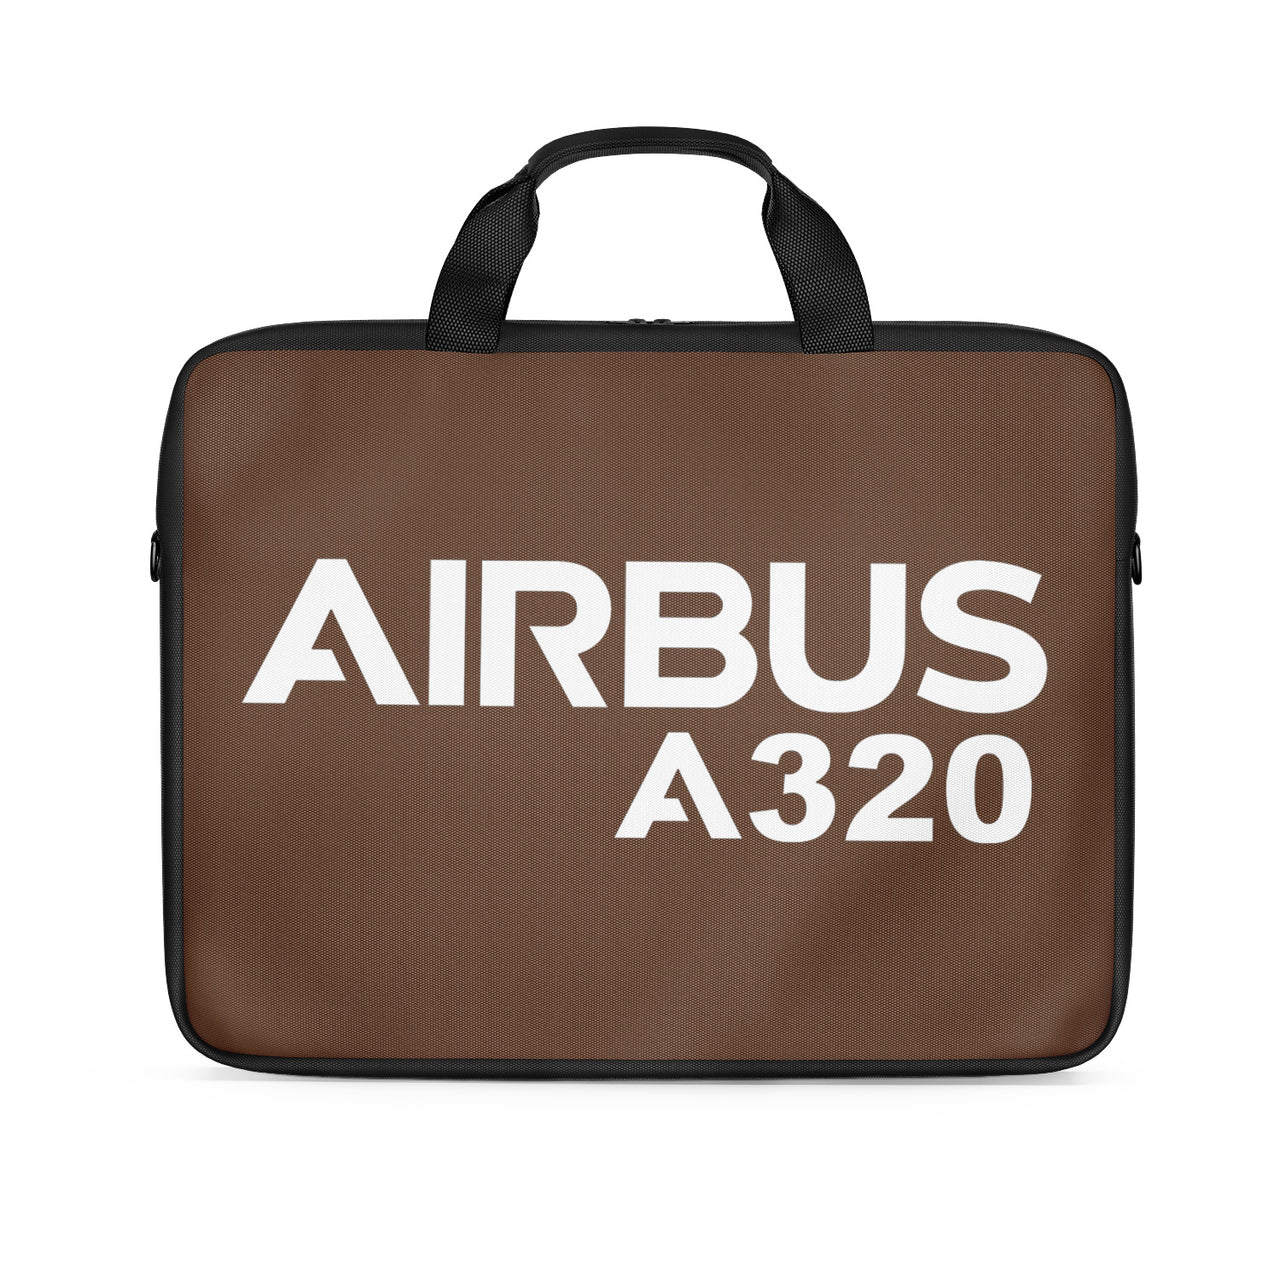 Airbus A320 & Text Designed Laptop & Tablet Bags